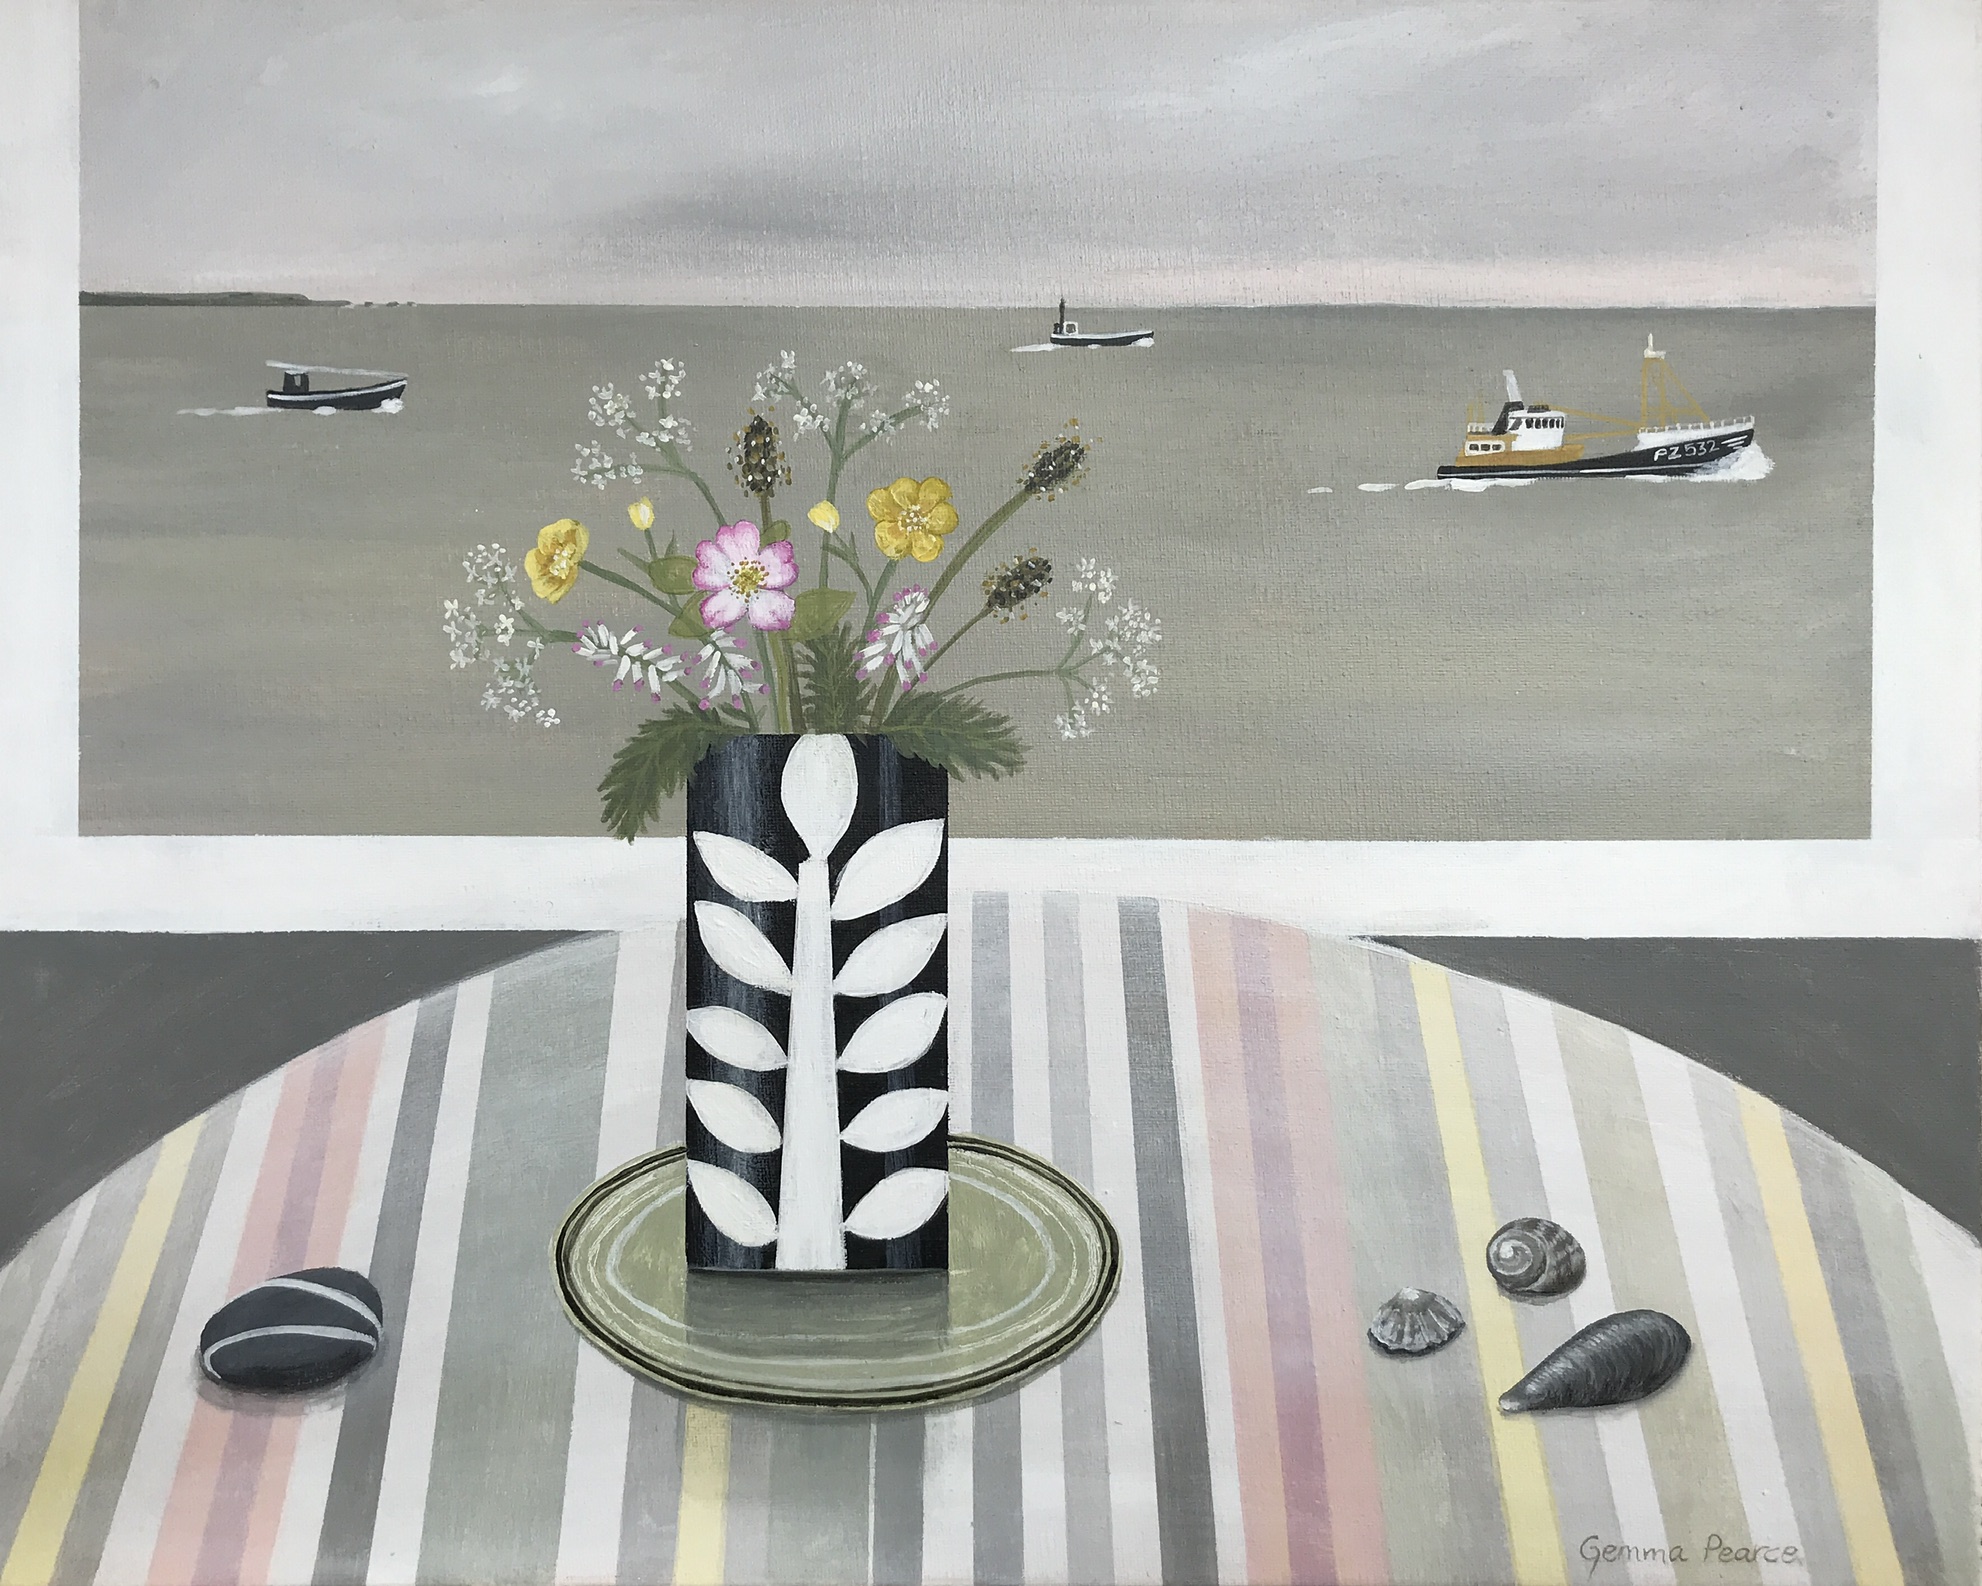 Feels Like Home: Gemma Pearce at Lighthouse Gallery